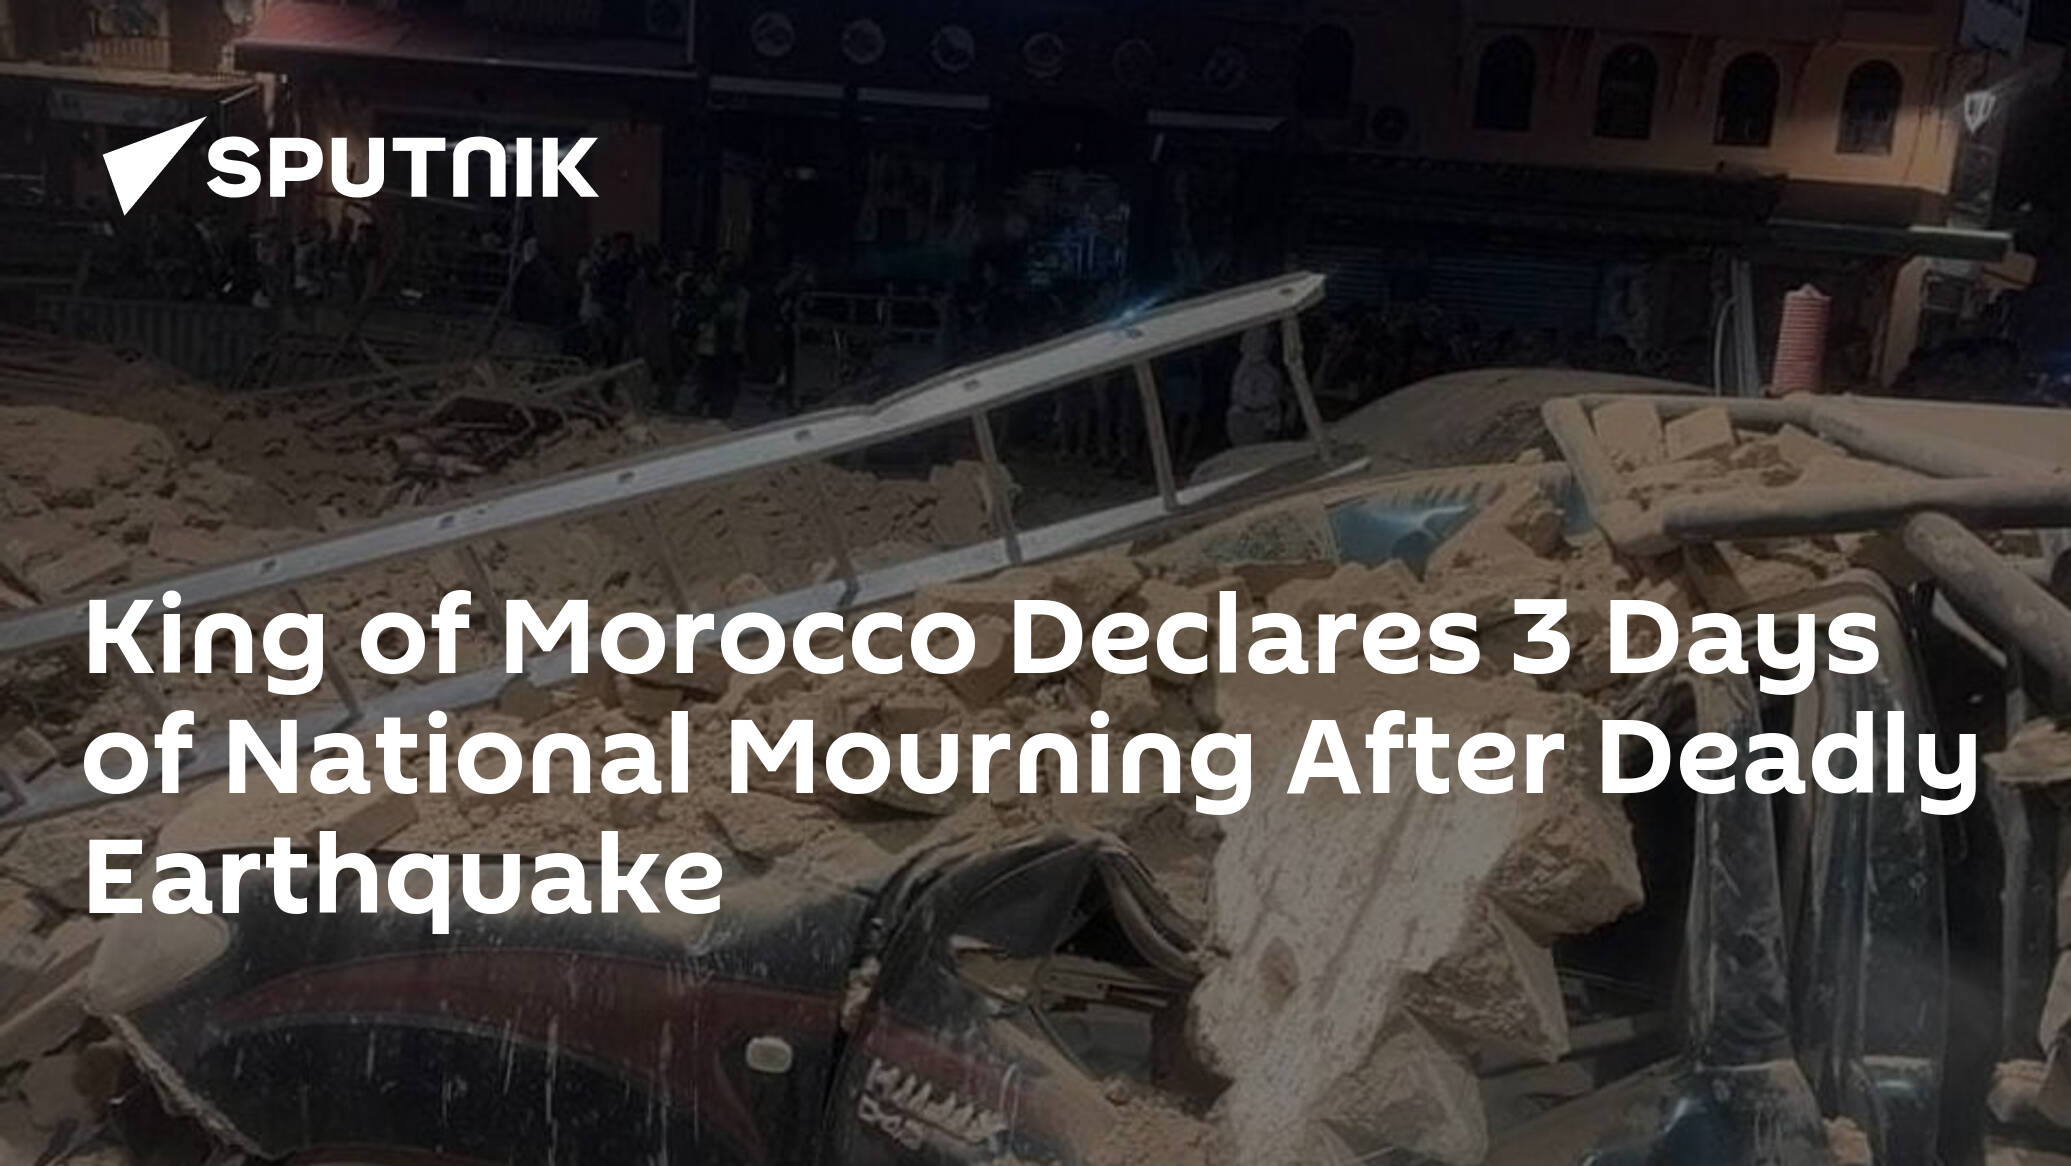 King of Morocco Declares 3 Days of National Mourning After Deadly Earthquake